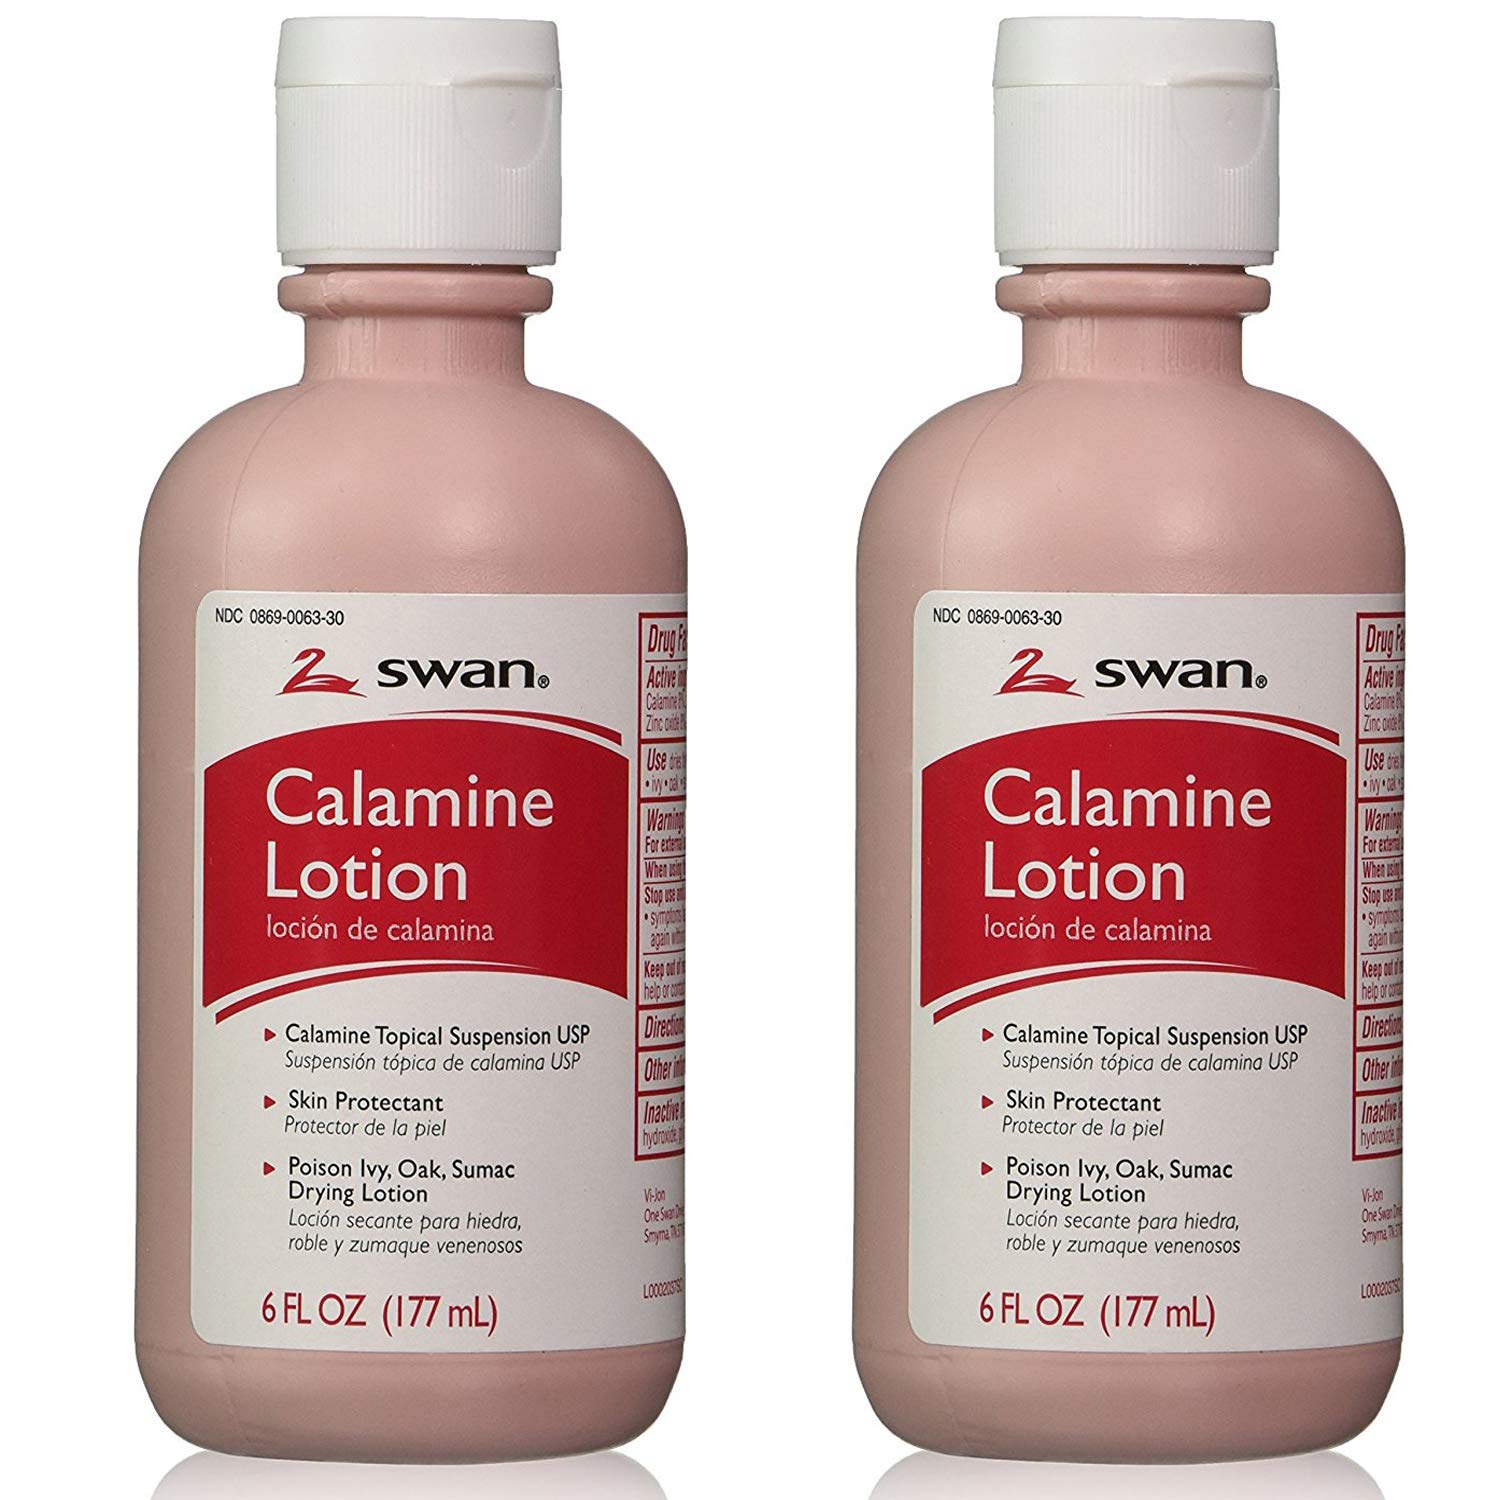 Calamine lotion two-pack